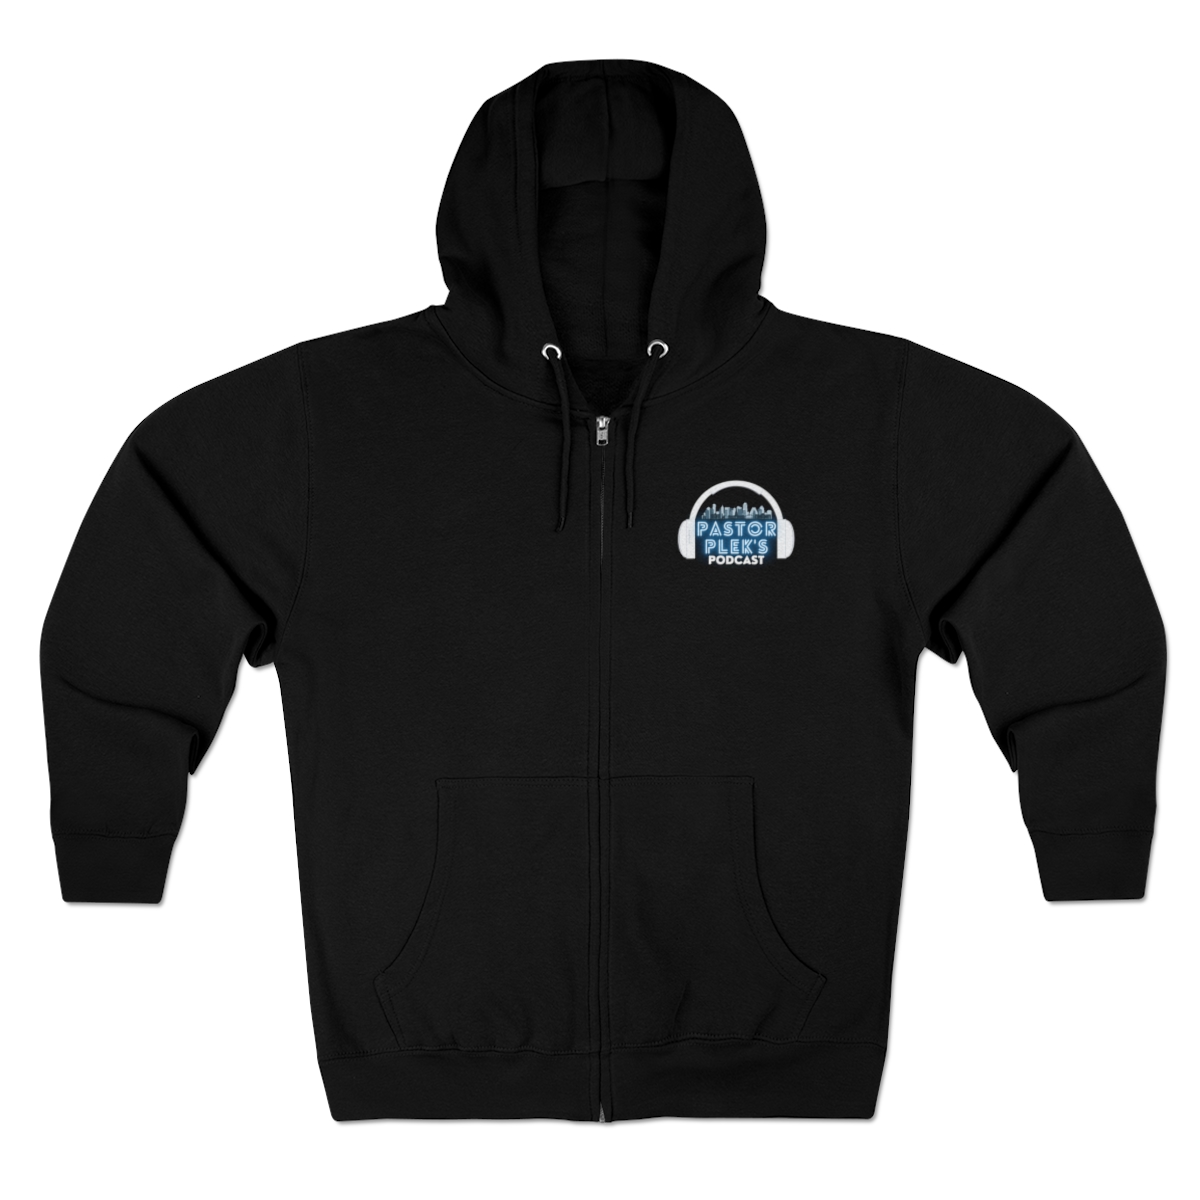 Pastor Plek's Podcast - Zippered Hoodie product thumbnail image